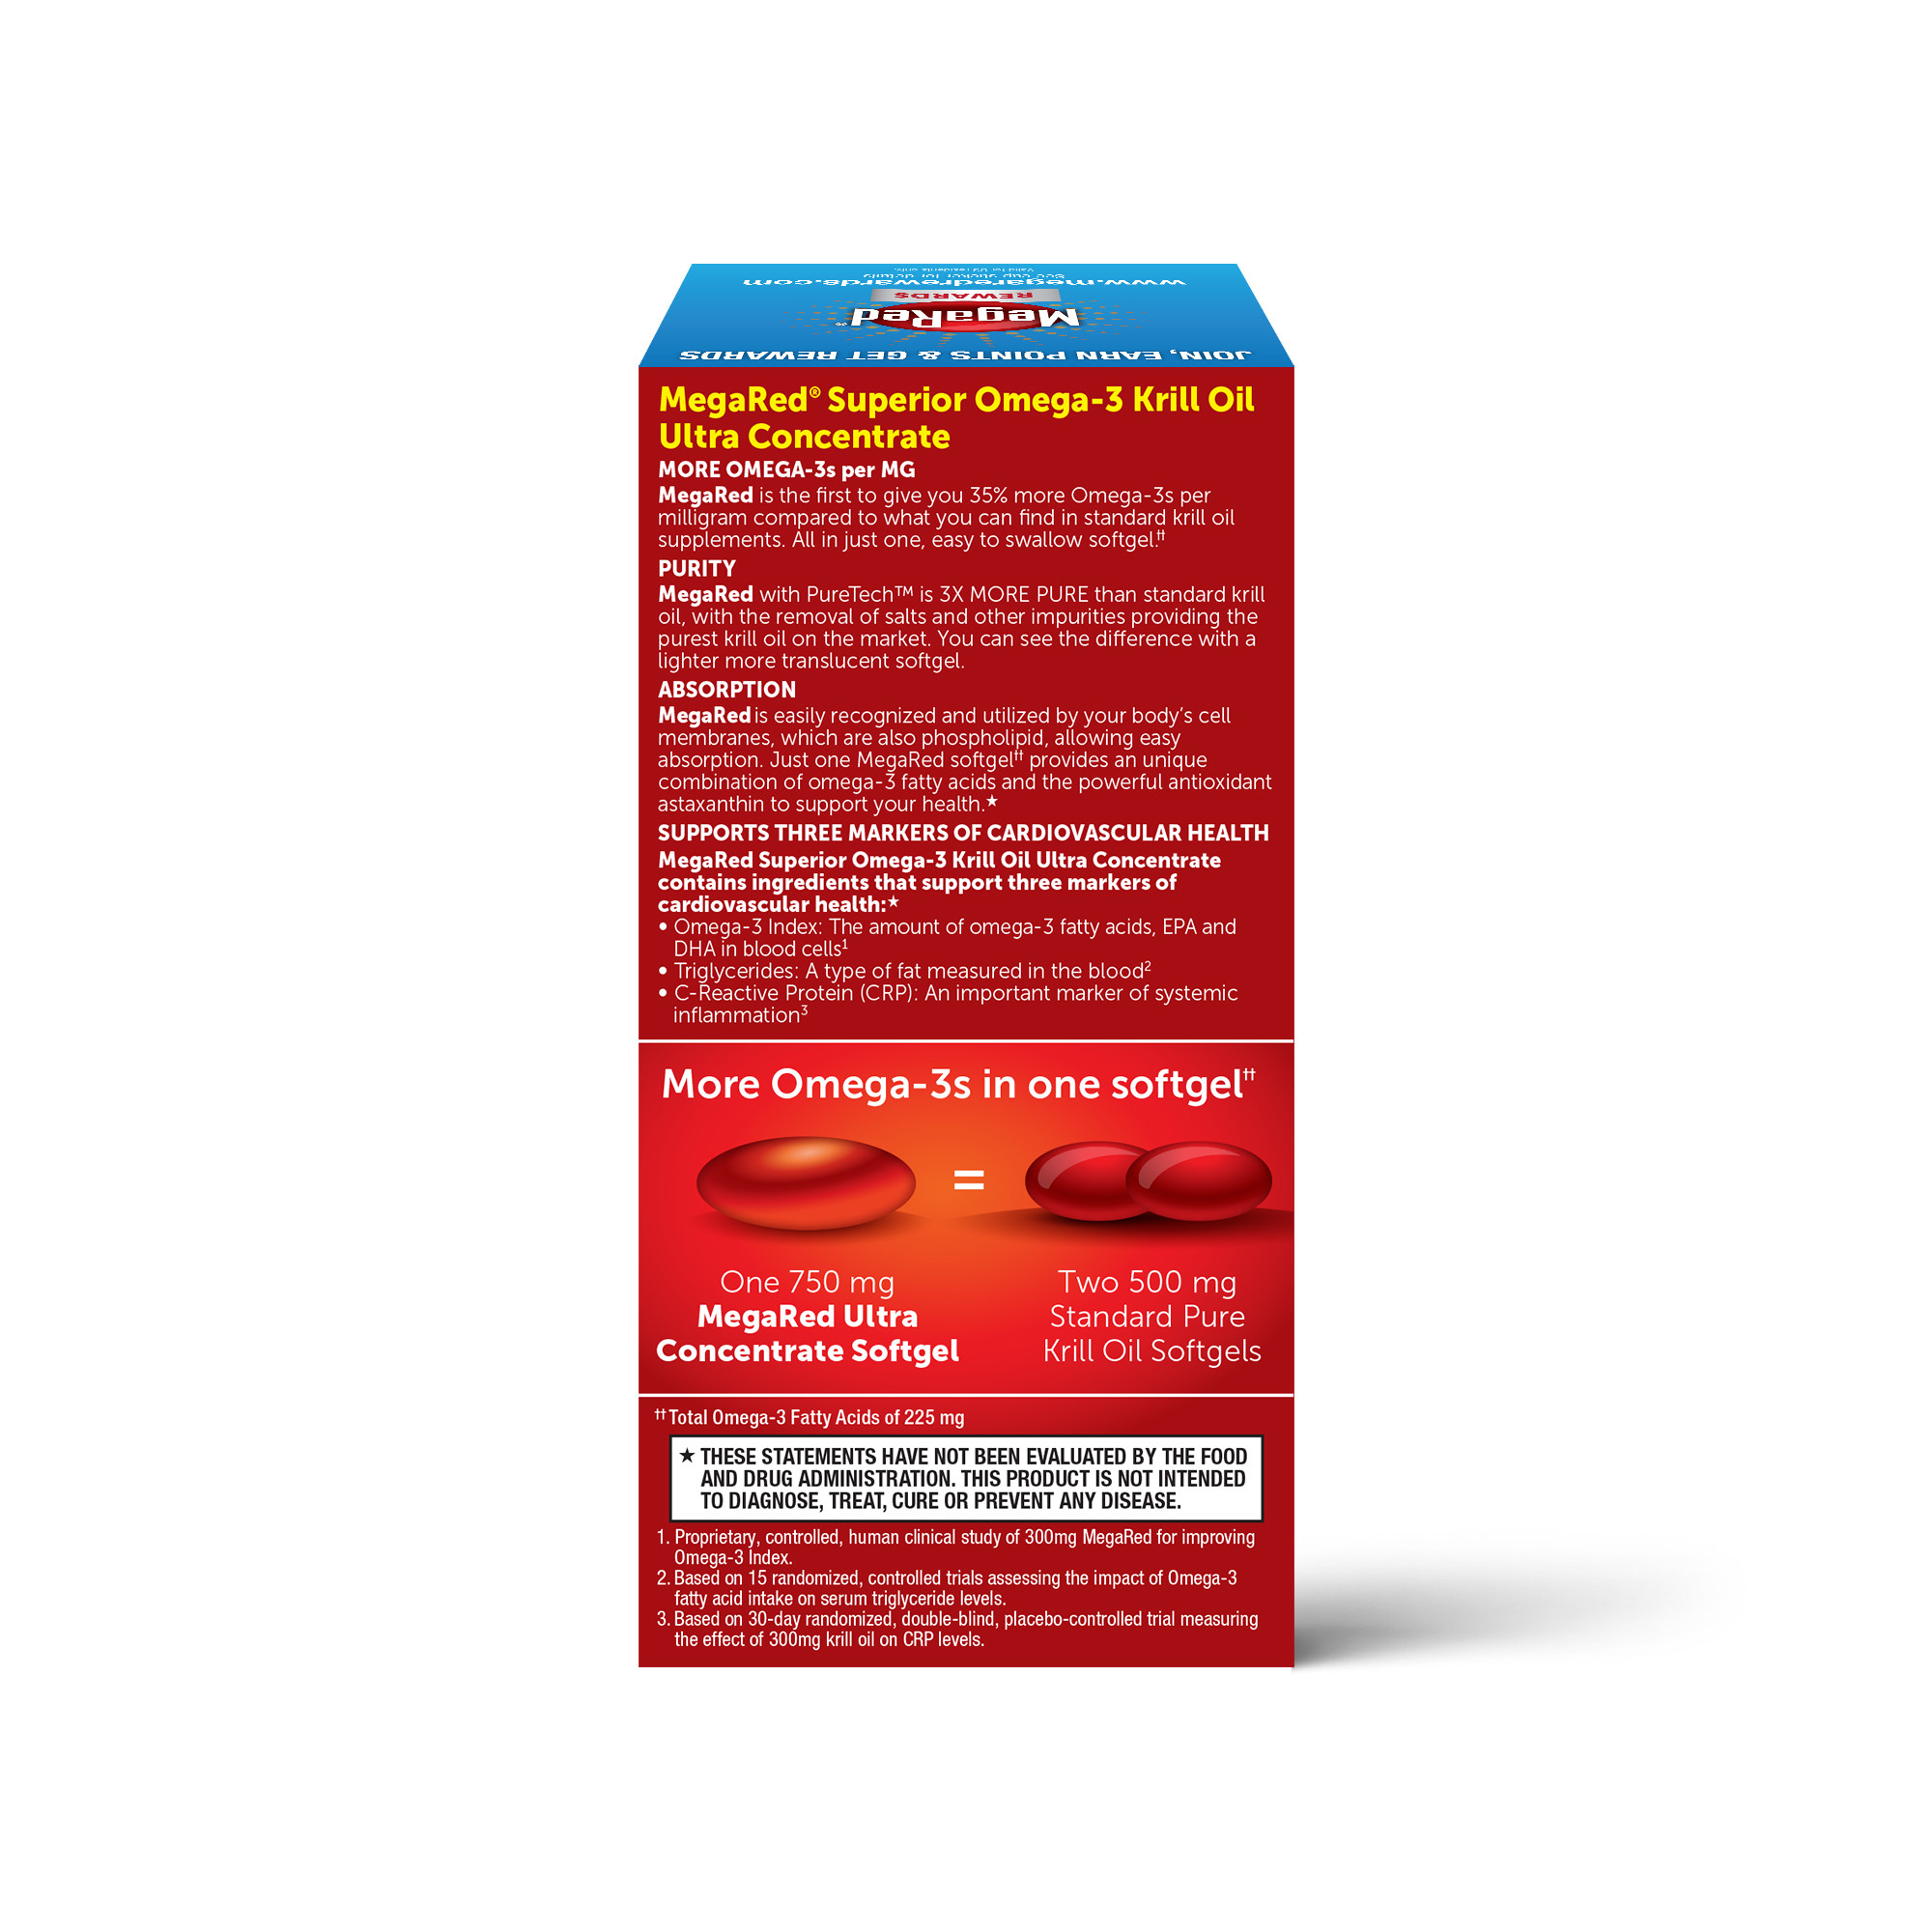 MegaRed 750mg Ultra Concentration Omega-3 Krill Oil, 40 Softgels - image 2 of 4